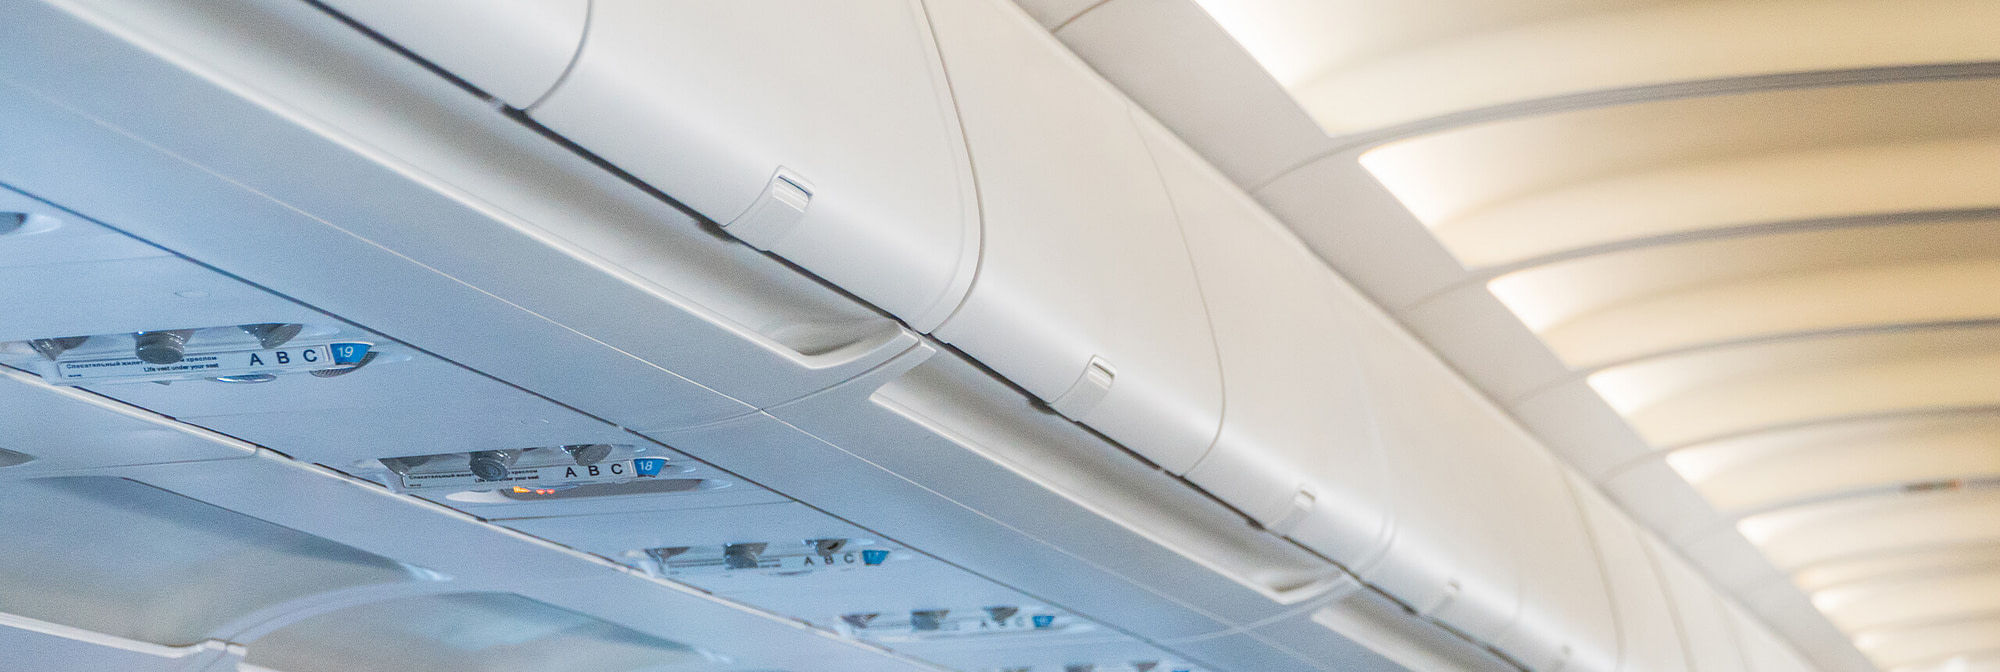 Thermoformed Plastic for the airline industry